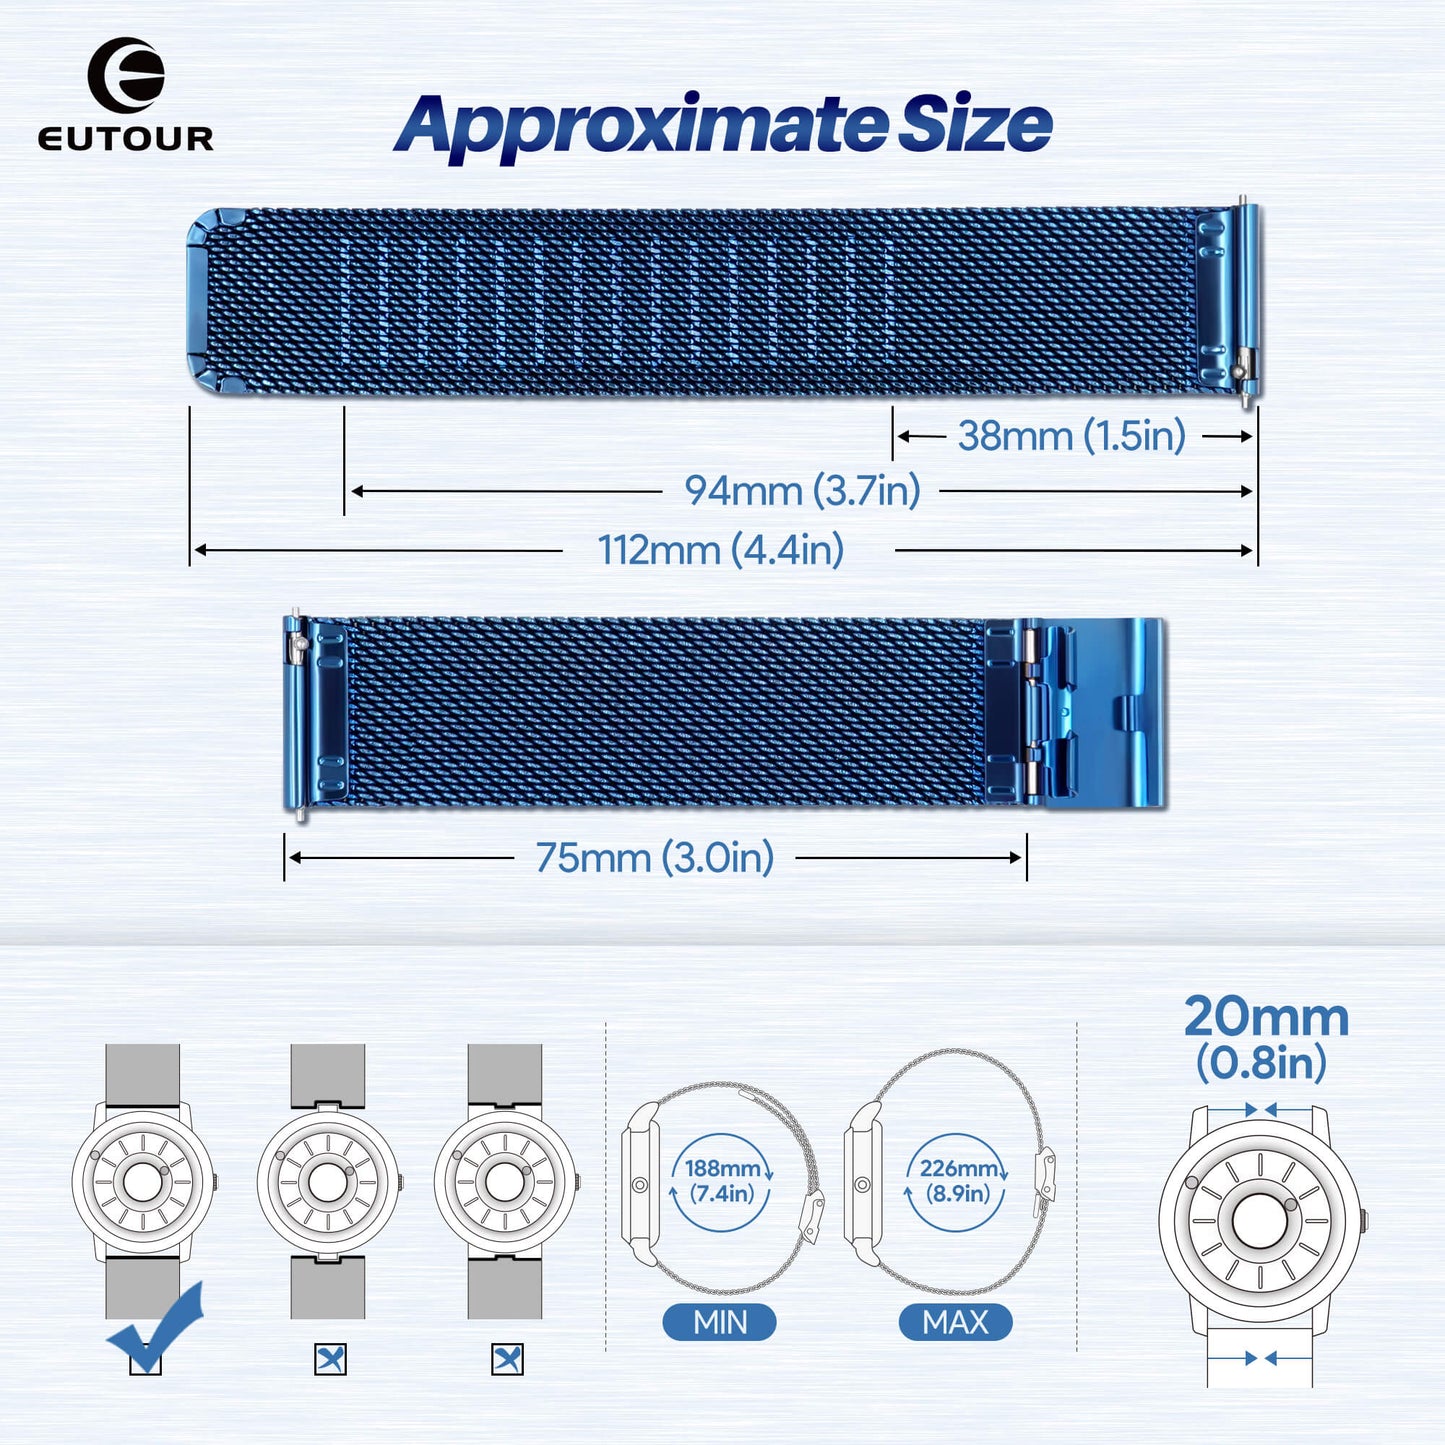 EUTOUR Quick Release 20mm Mesh Watch Band